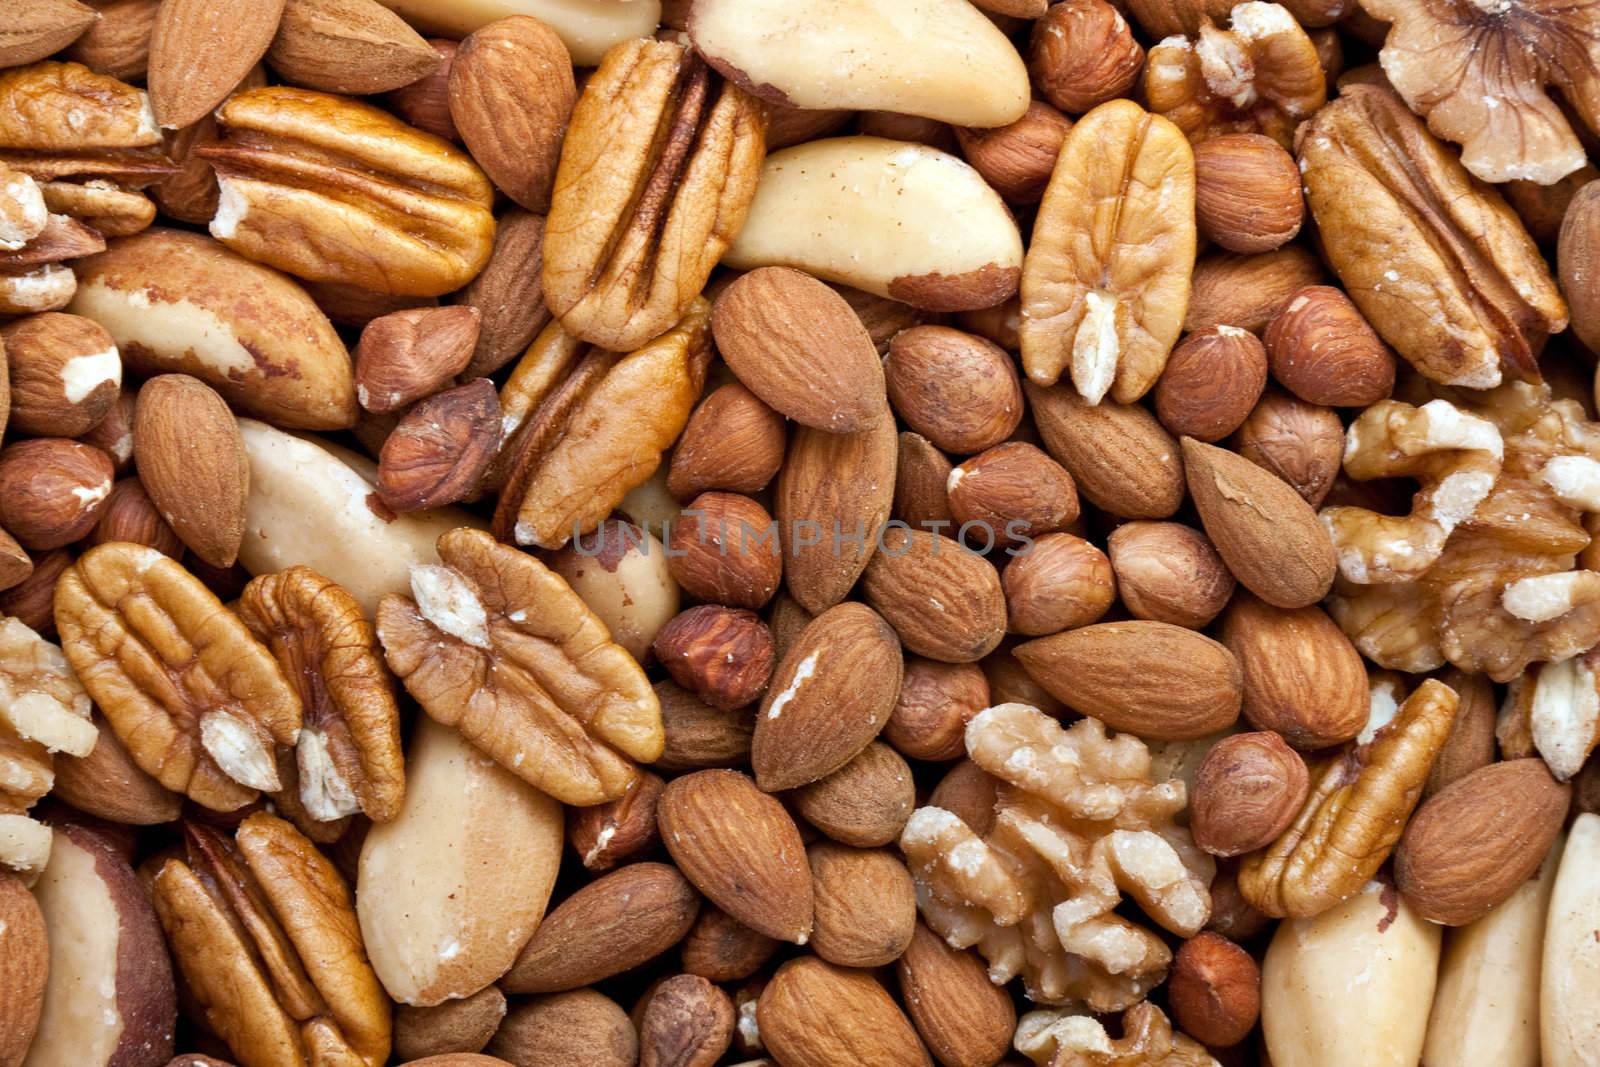 A selection of nuts: close-up